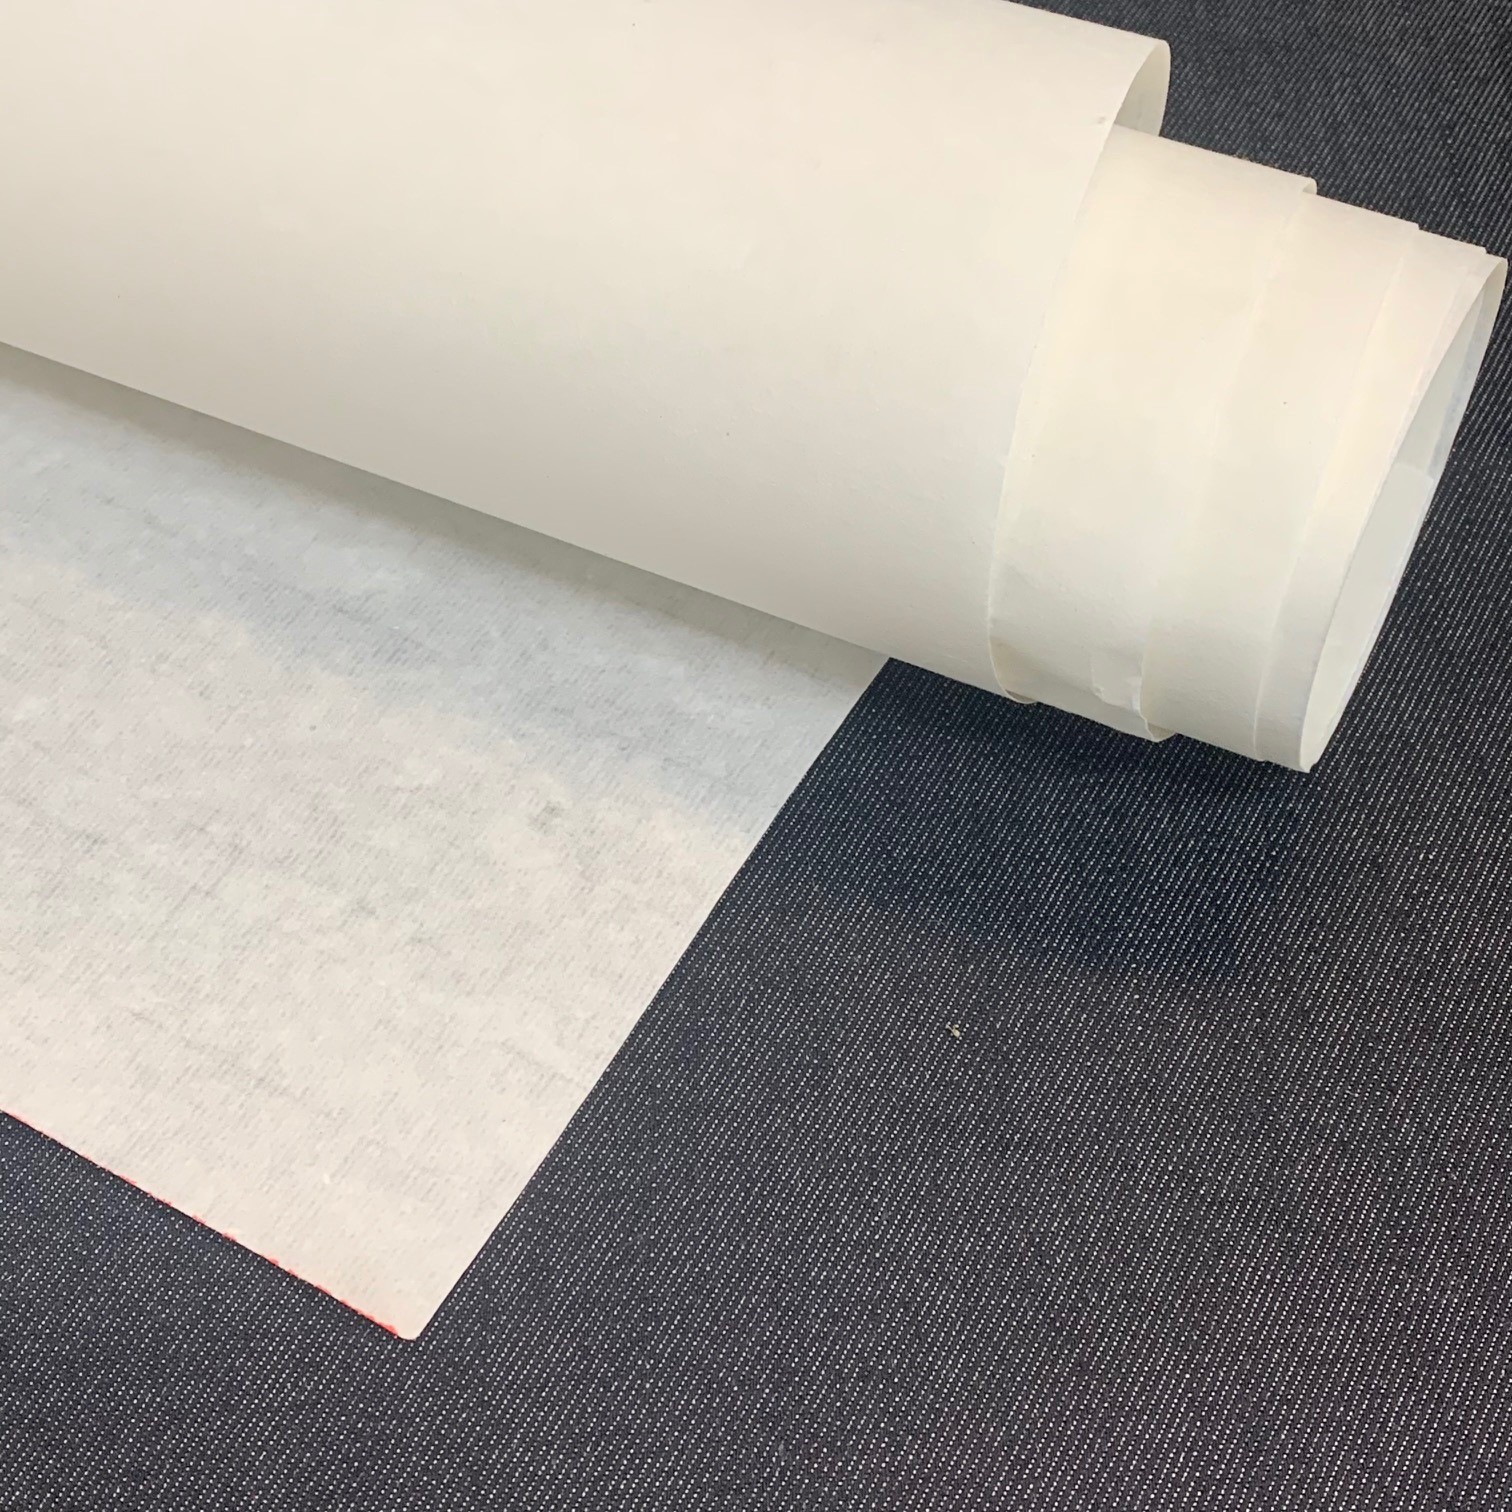 RICE PAPER FOR PRINTING